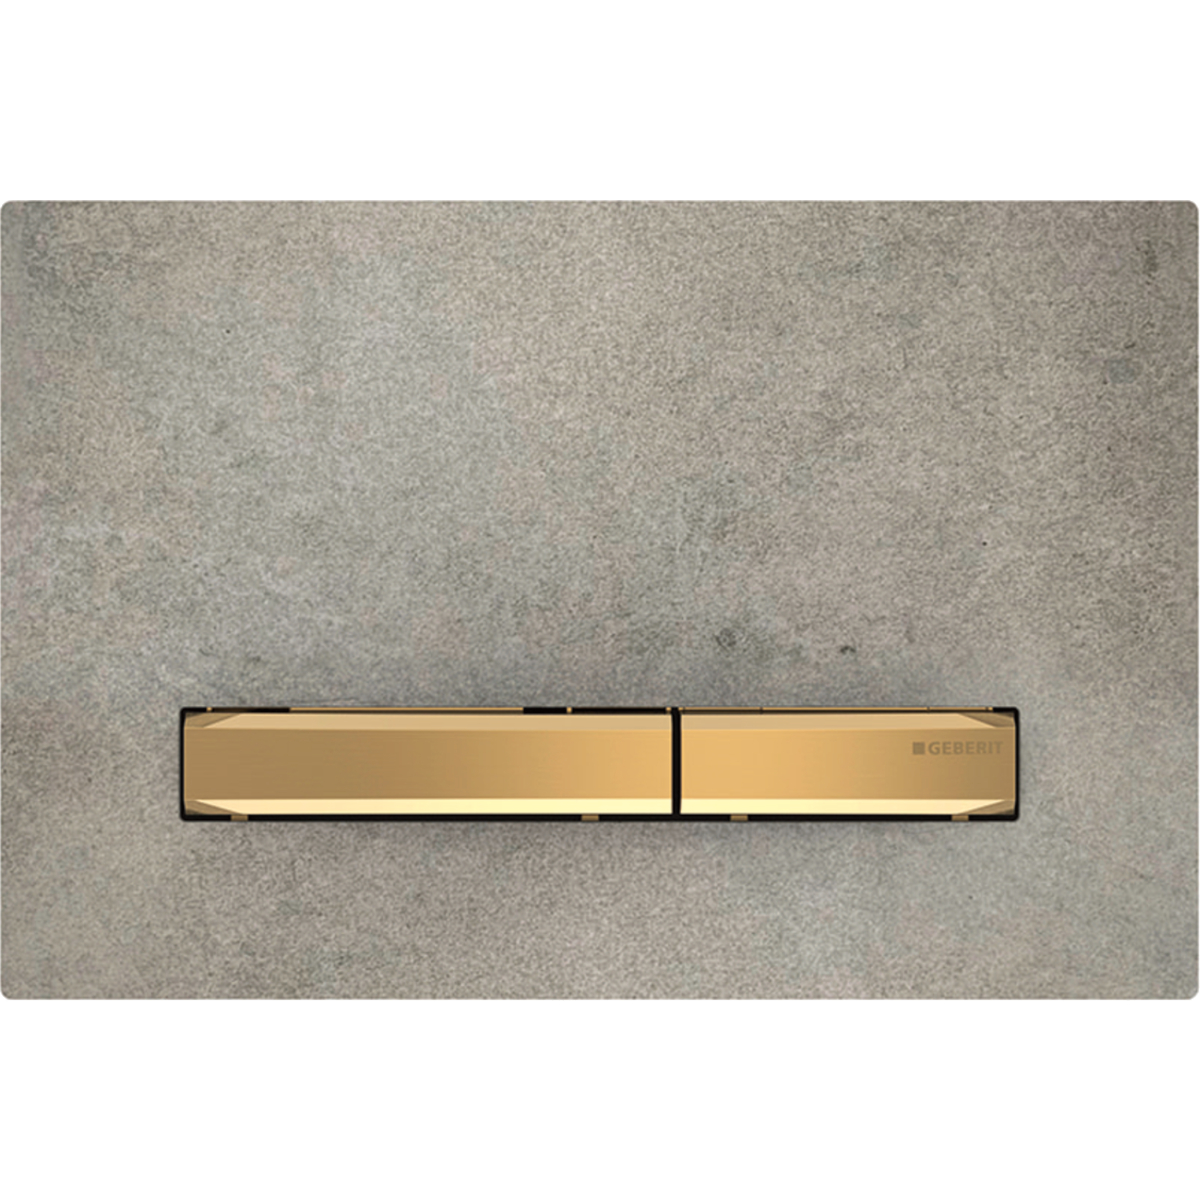 Geberit 115.672.JV.2 Actuator Plate Sigma50 for Dual Flush, Metal Colour Brass - Base Plate and Buttons: Brass/Cover Plate: Concrete Look